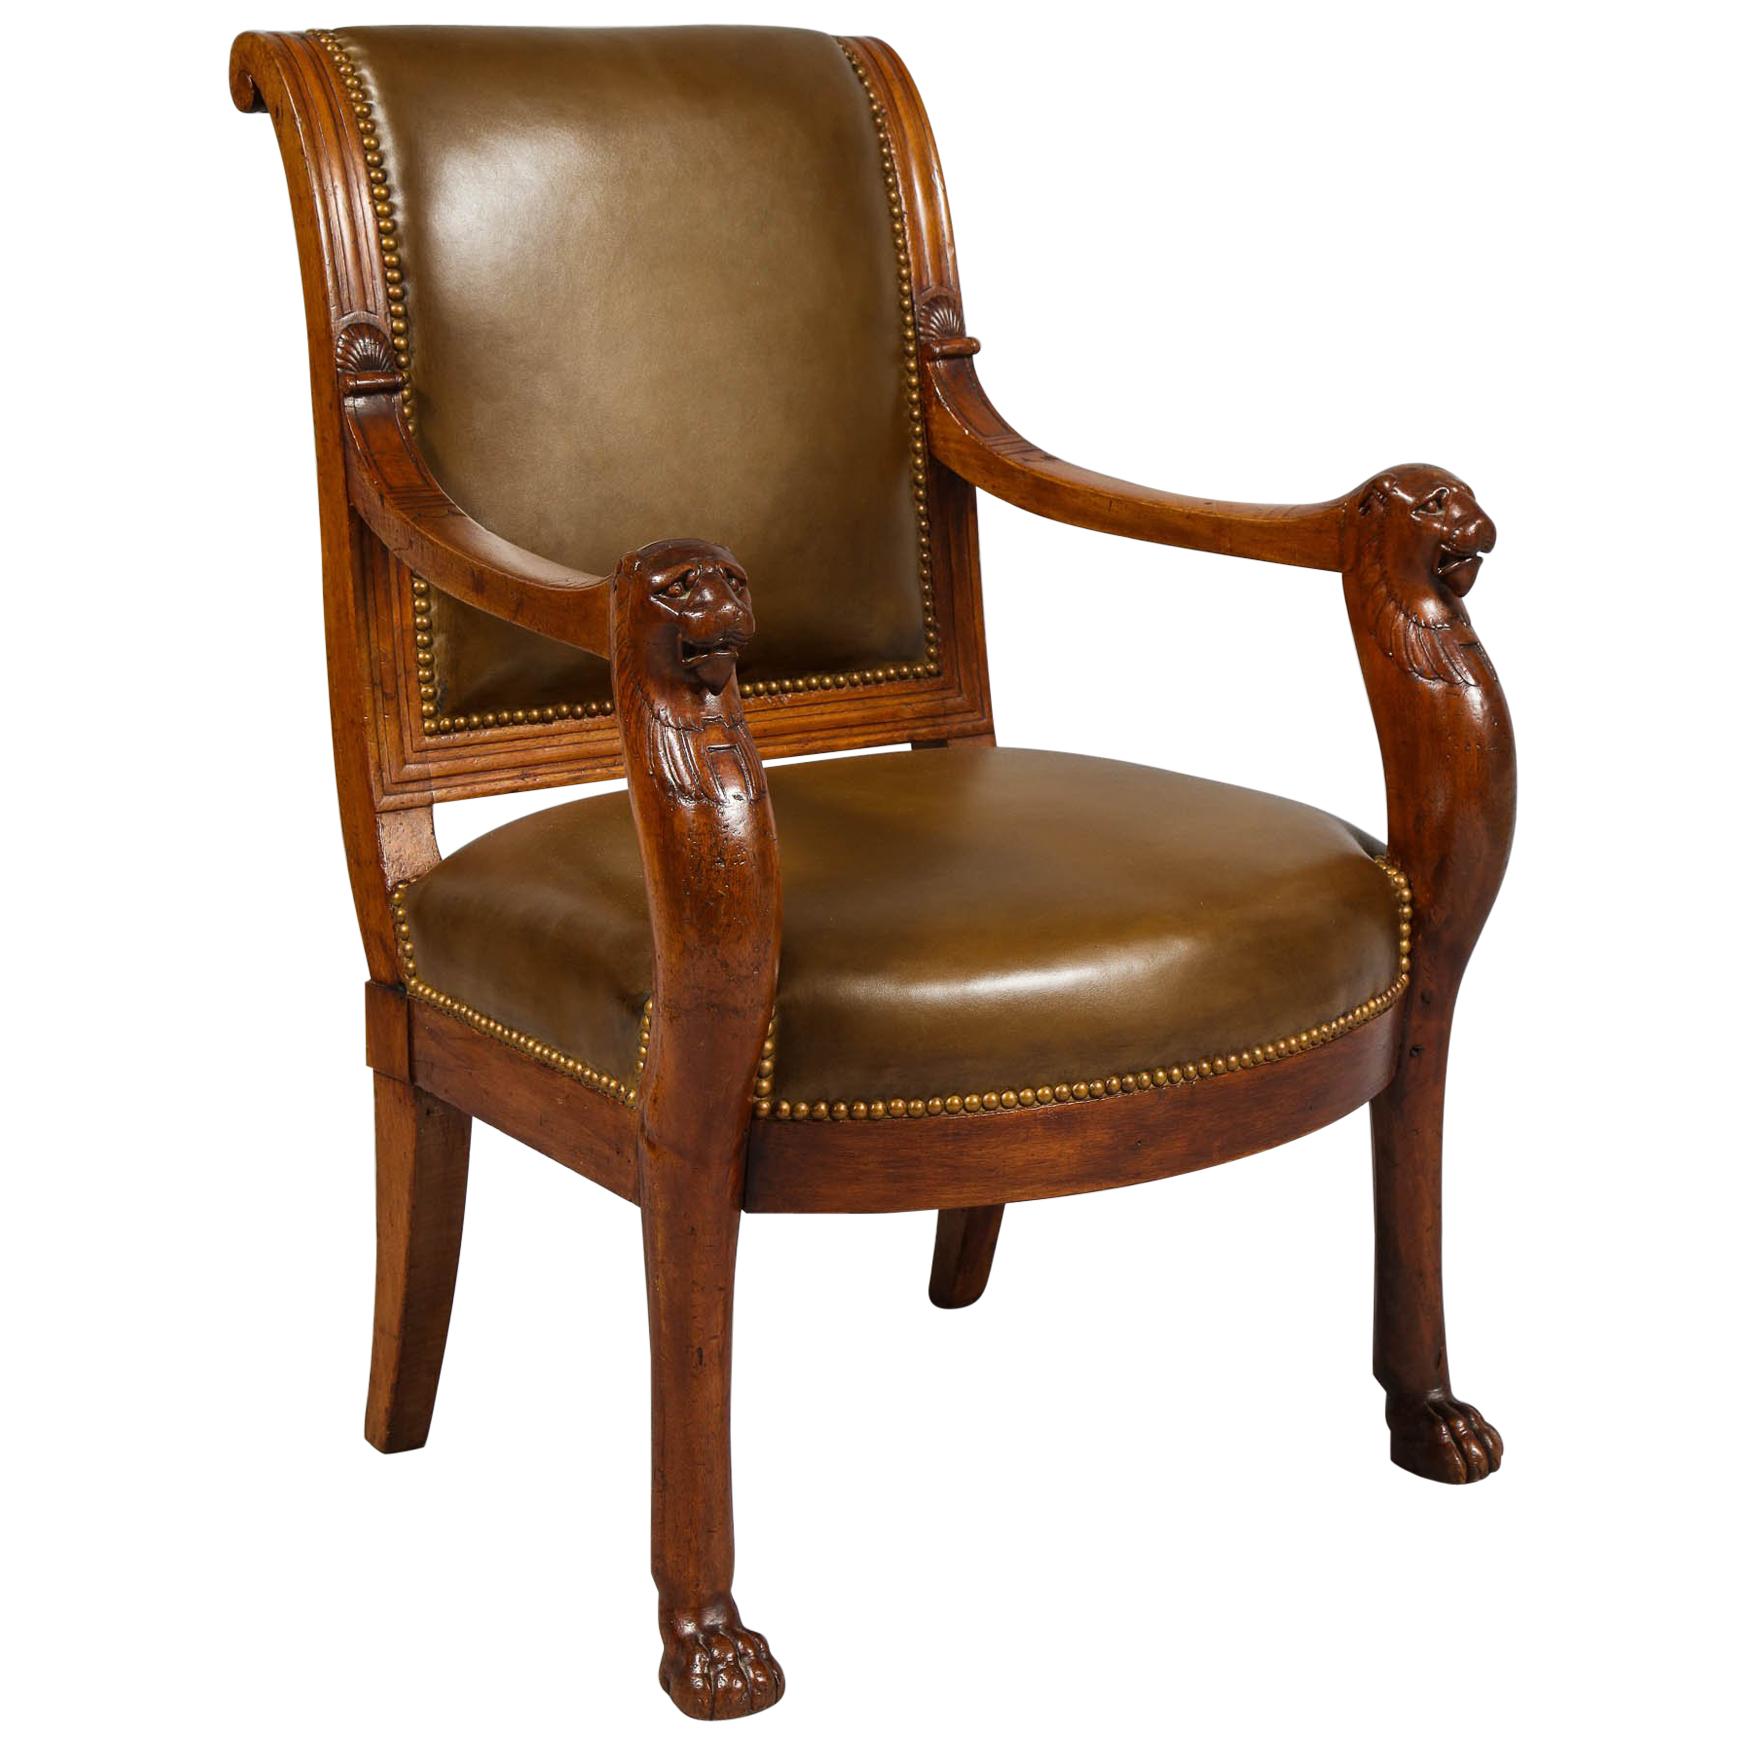 The Last King's Chair For Sale